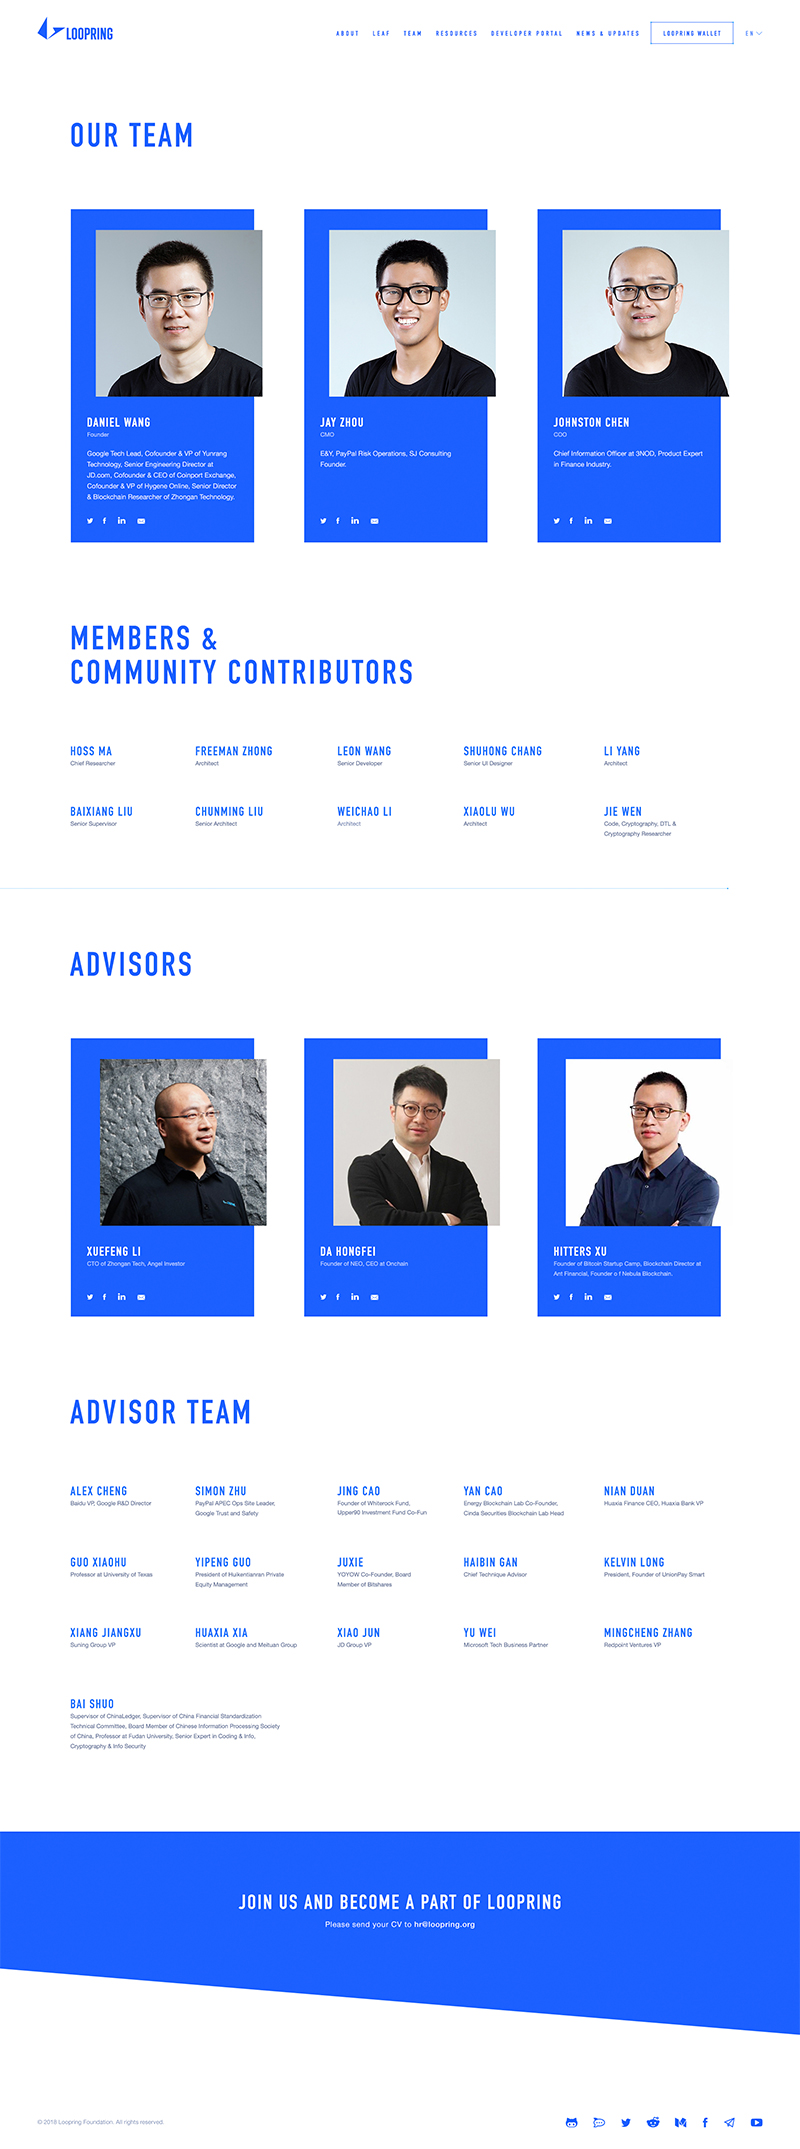 Loopring Website Inner Pages Design and Development